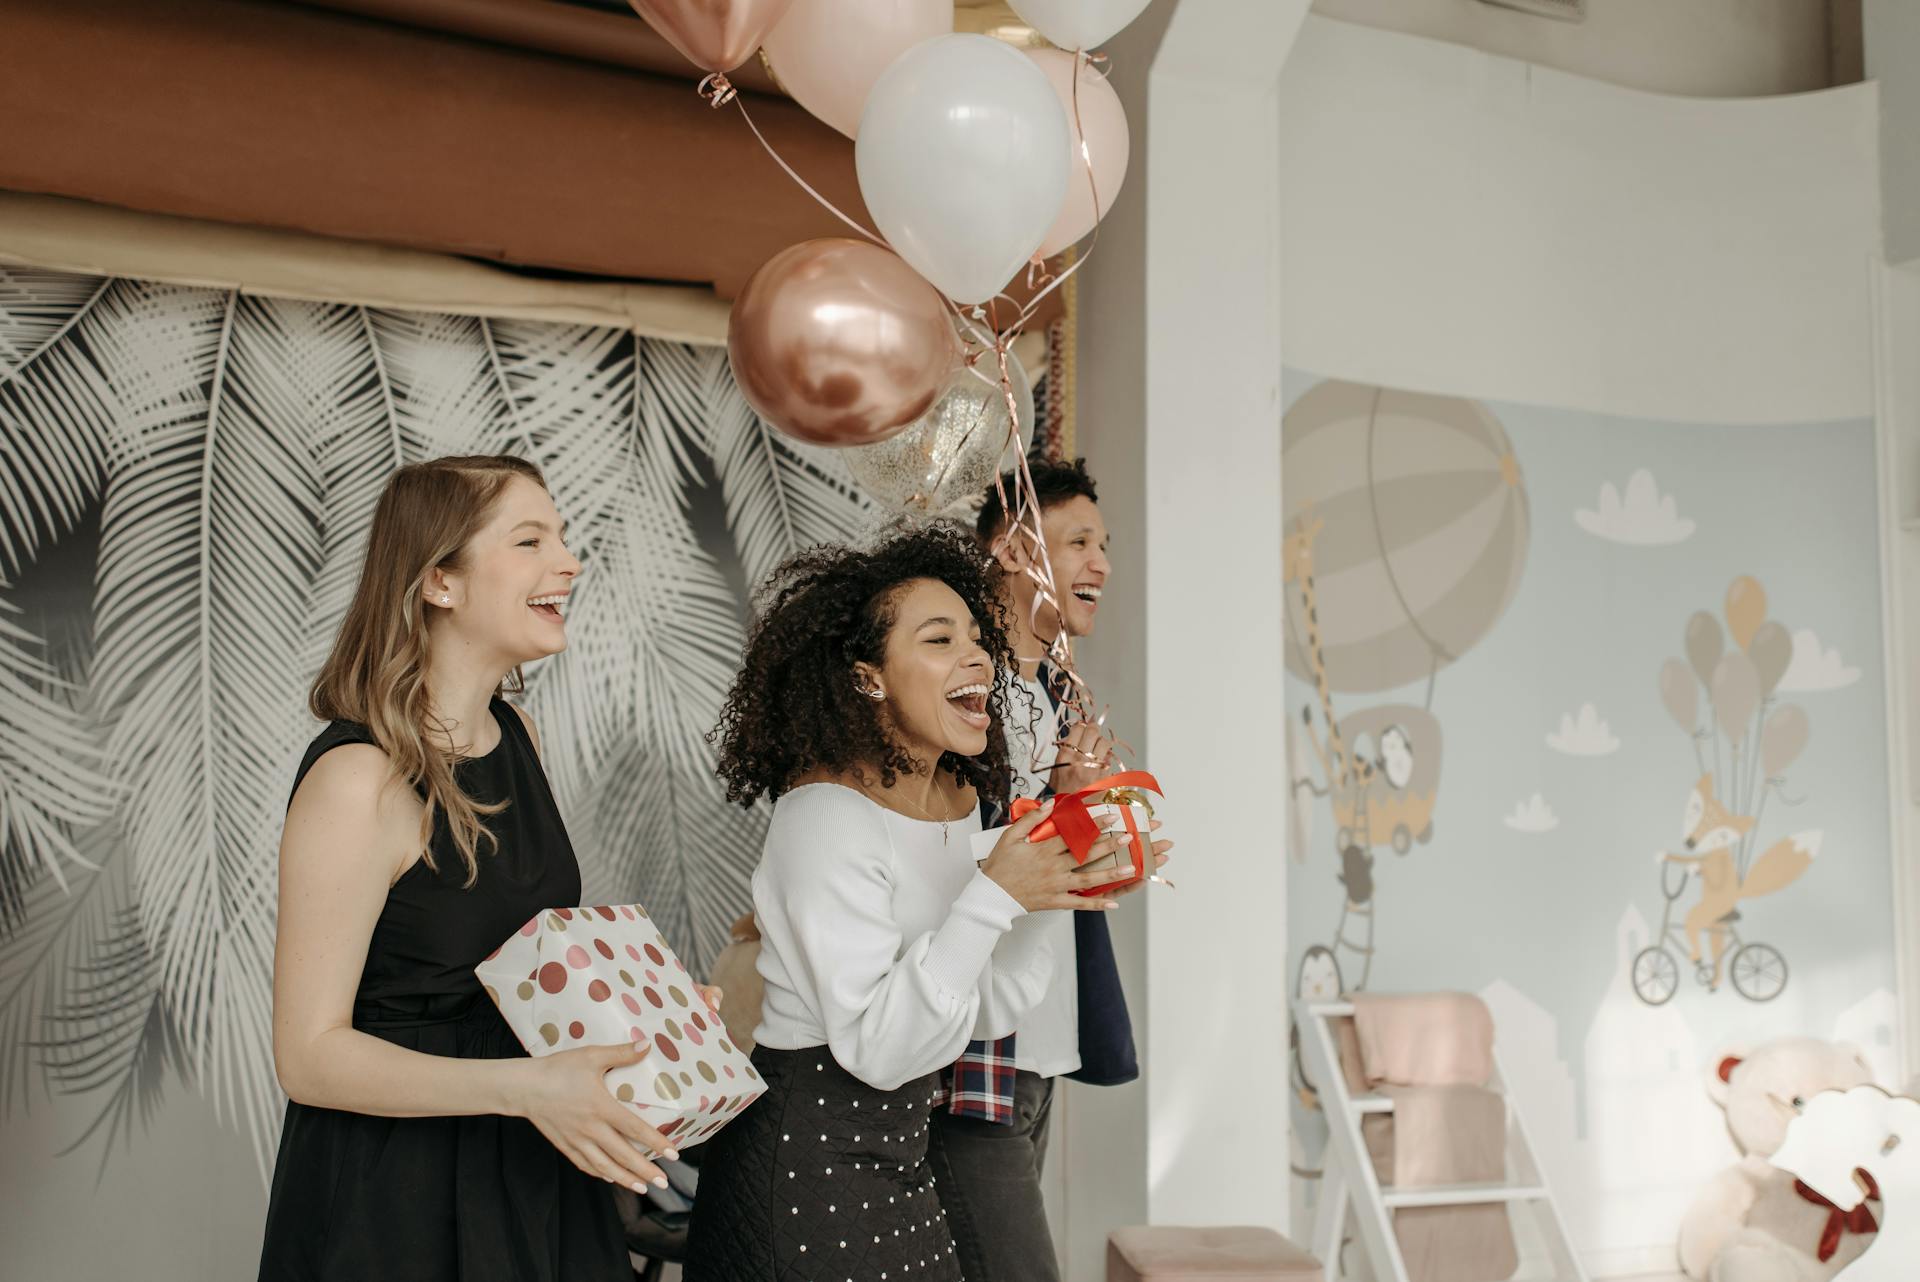 Youngsters singing happy birthday while holding gifts and balloons | Source: Pexels